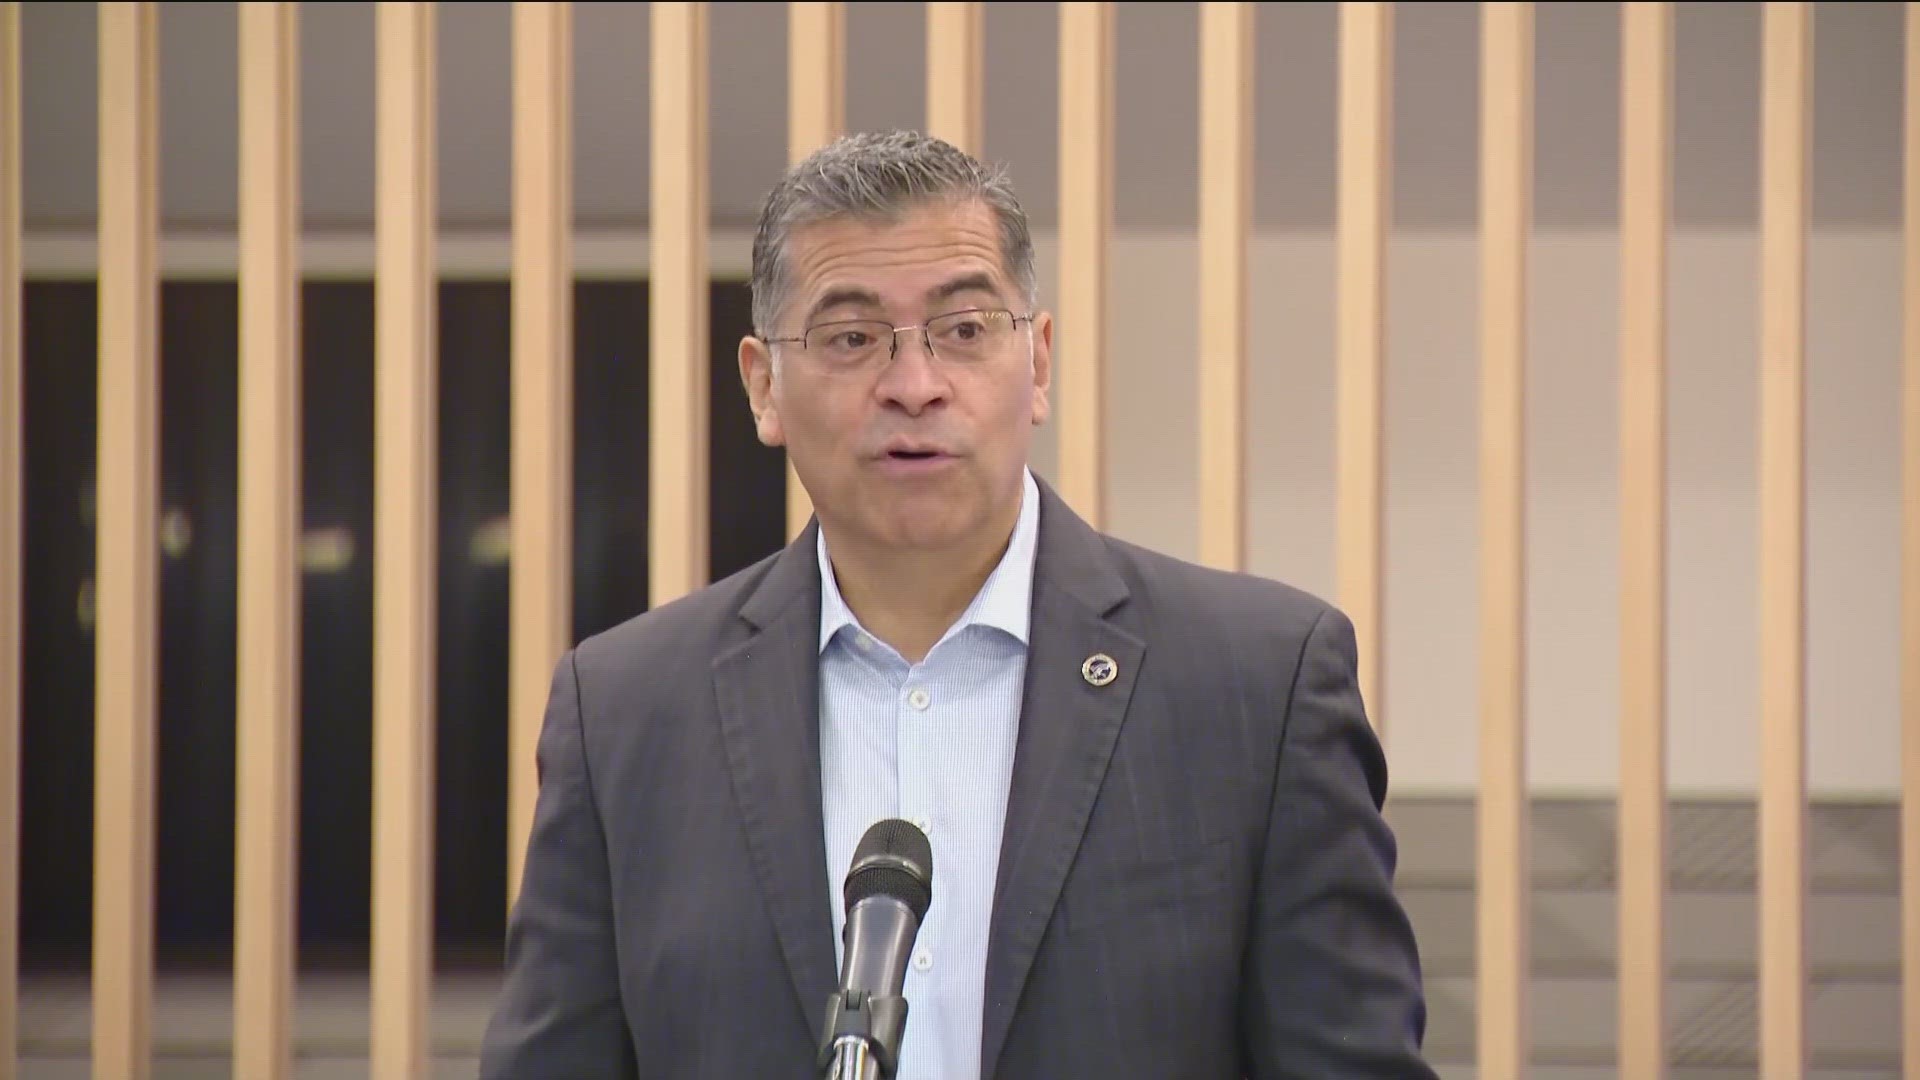 Secretary of Health and Human Services Xavier Becerra plans to share what the Biden Administration is doing to improve the lives of those in our Latino community.